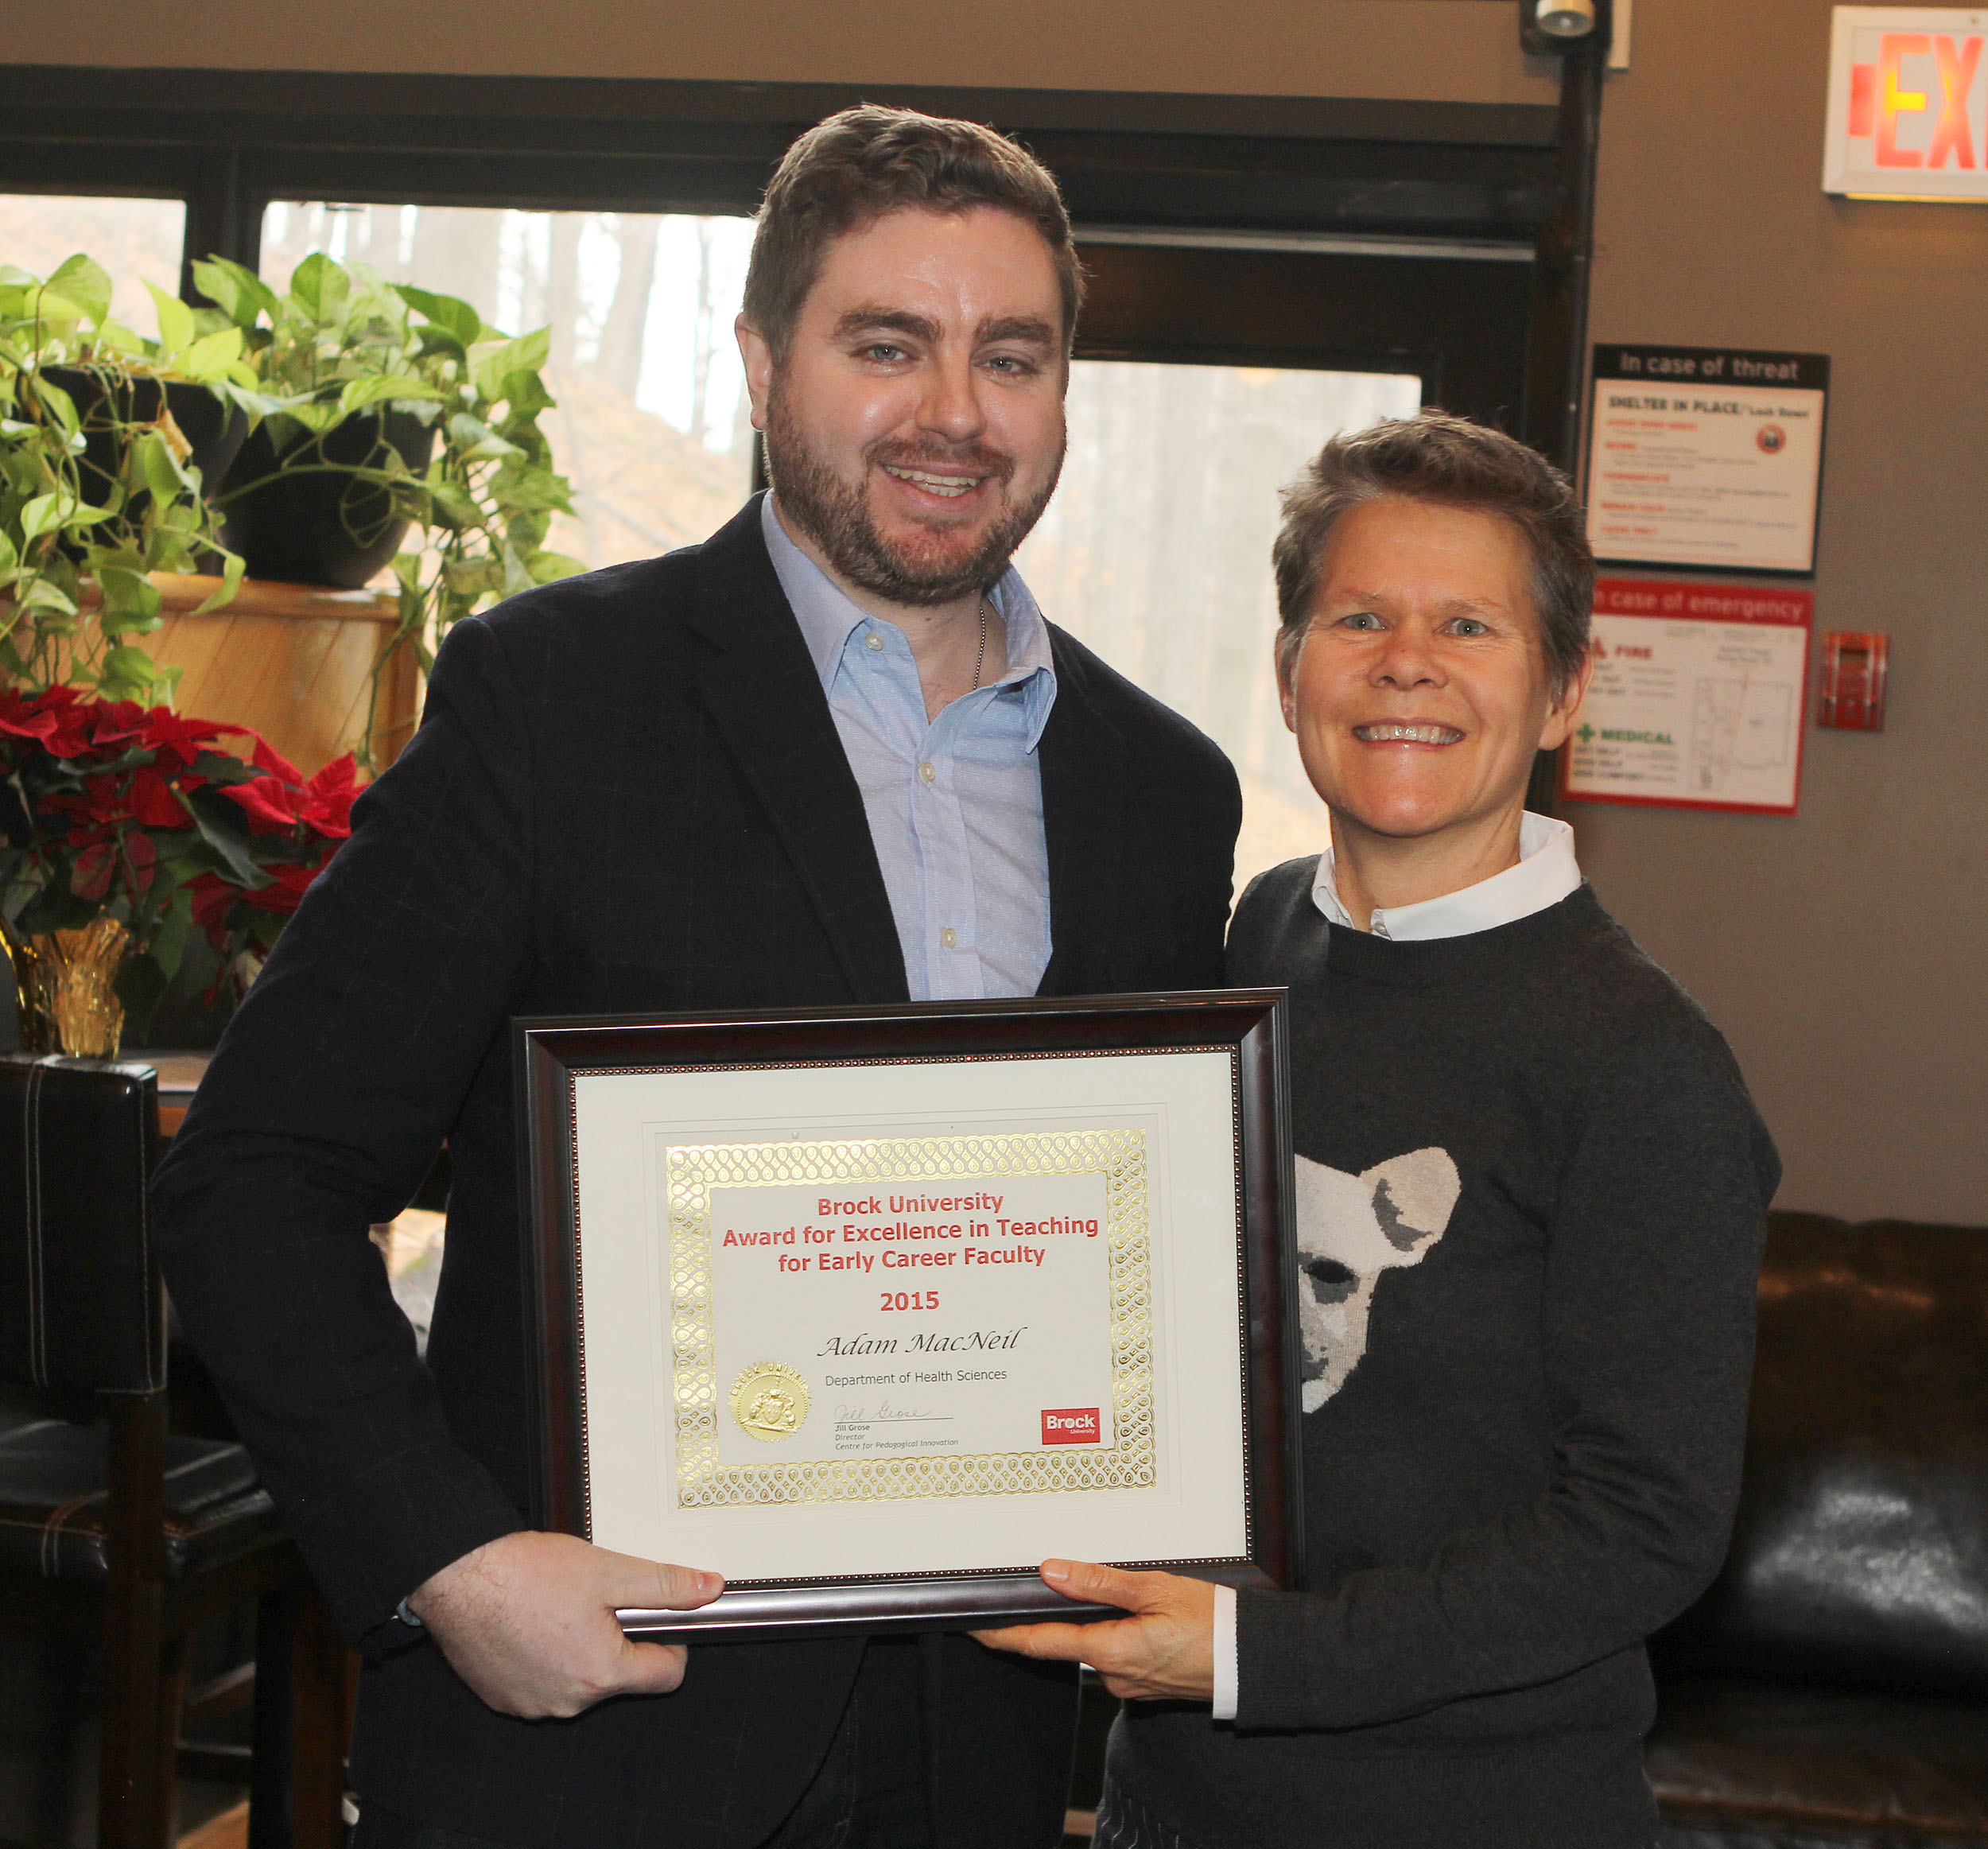 Dr. Adam MacNeil receiving the 2015 Brock University Award for Excellence in Teaching for Early Career Faculty from Dr. Paula Gardner the 2014 recipient